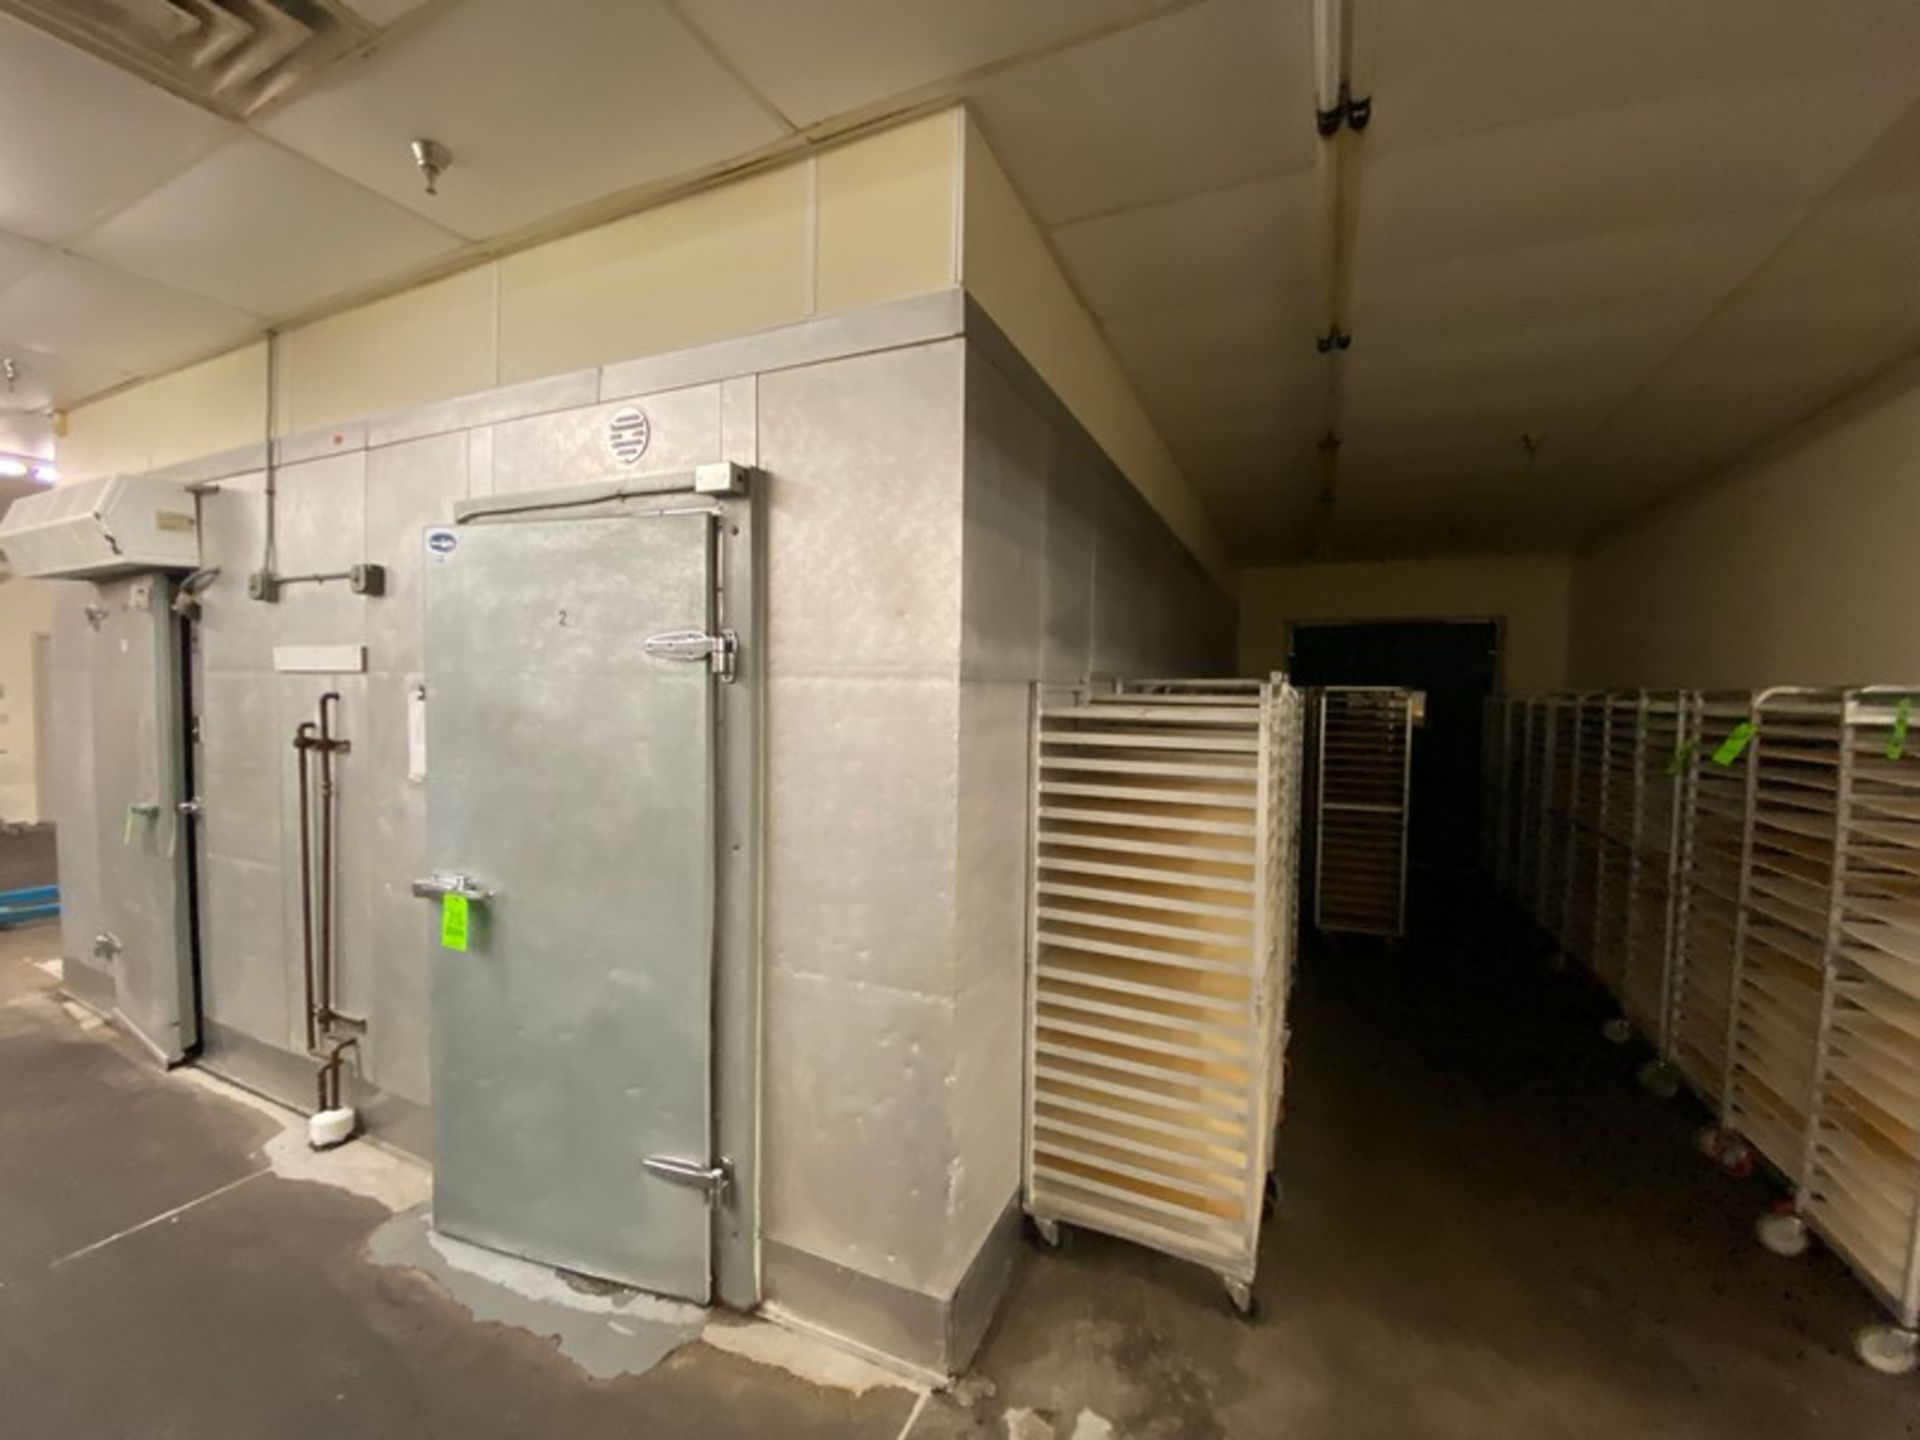 WALK-IN BLAST FREEZER, WITH (2) KRAMER 3-FAN BLOWER UNITS INSIDE THE UNITS, WITH (2) DOORS (LOCATED - Image 7 of 7